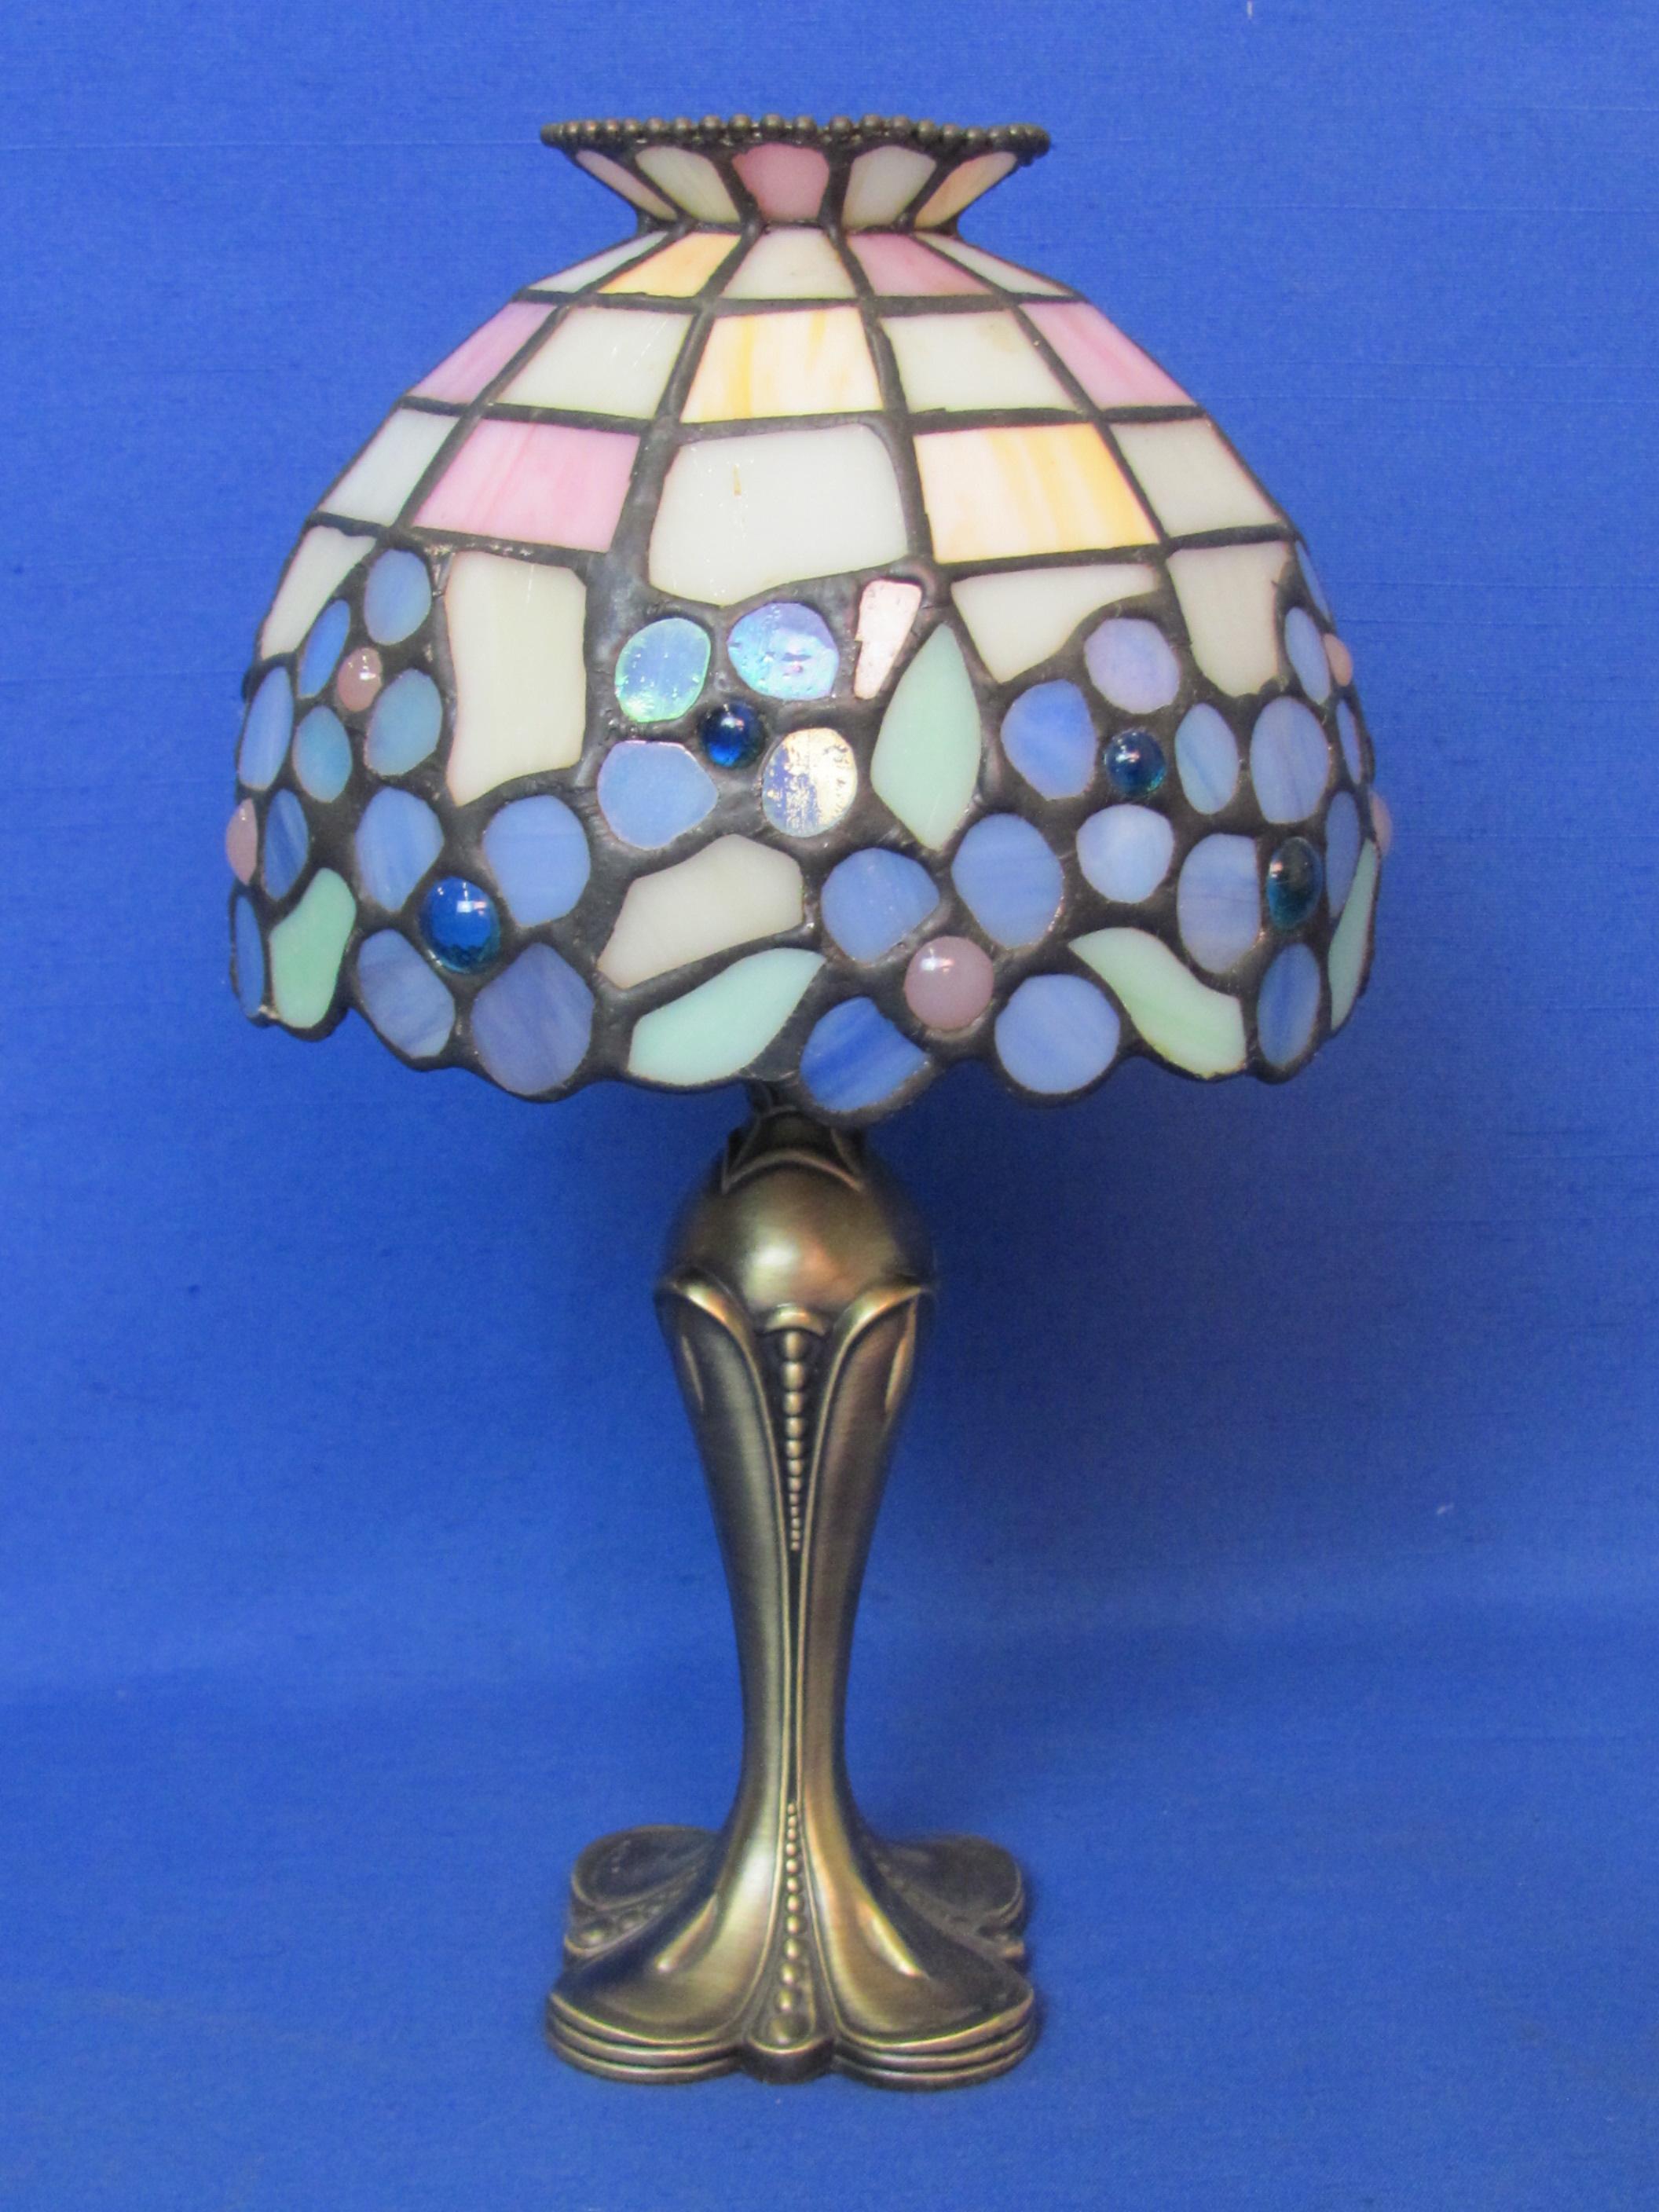 Metal Tea Light Candle Holder with Stained Glass Shade in Blues/Purples – 10” tall